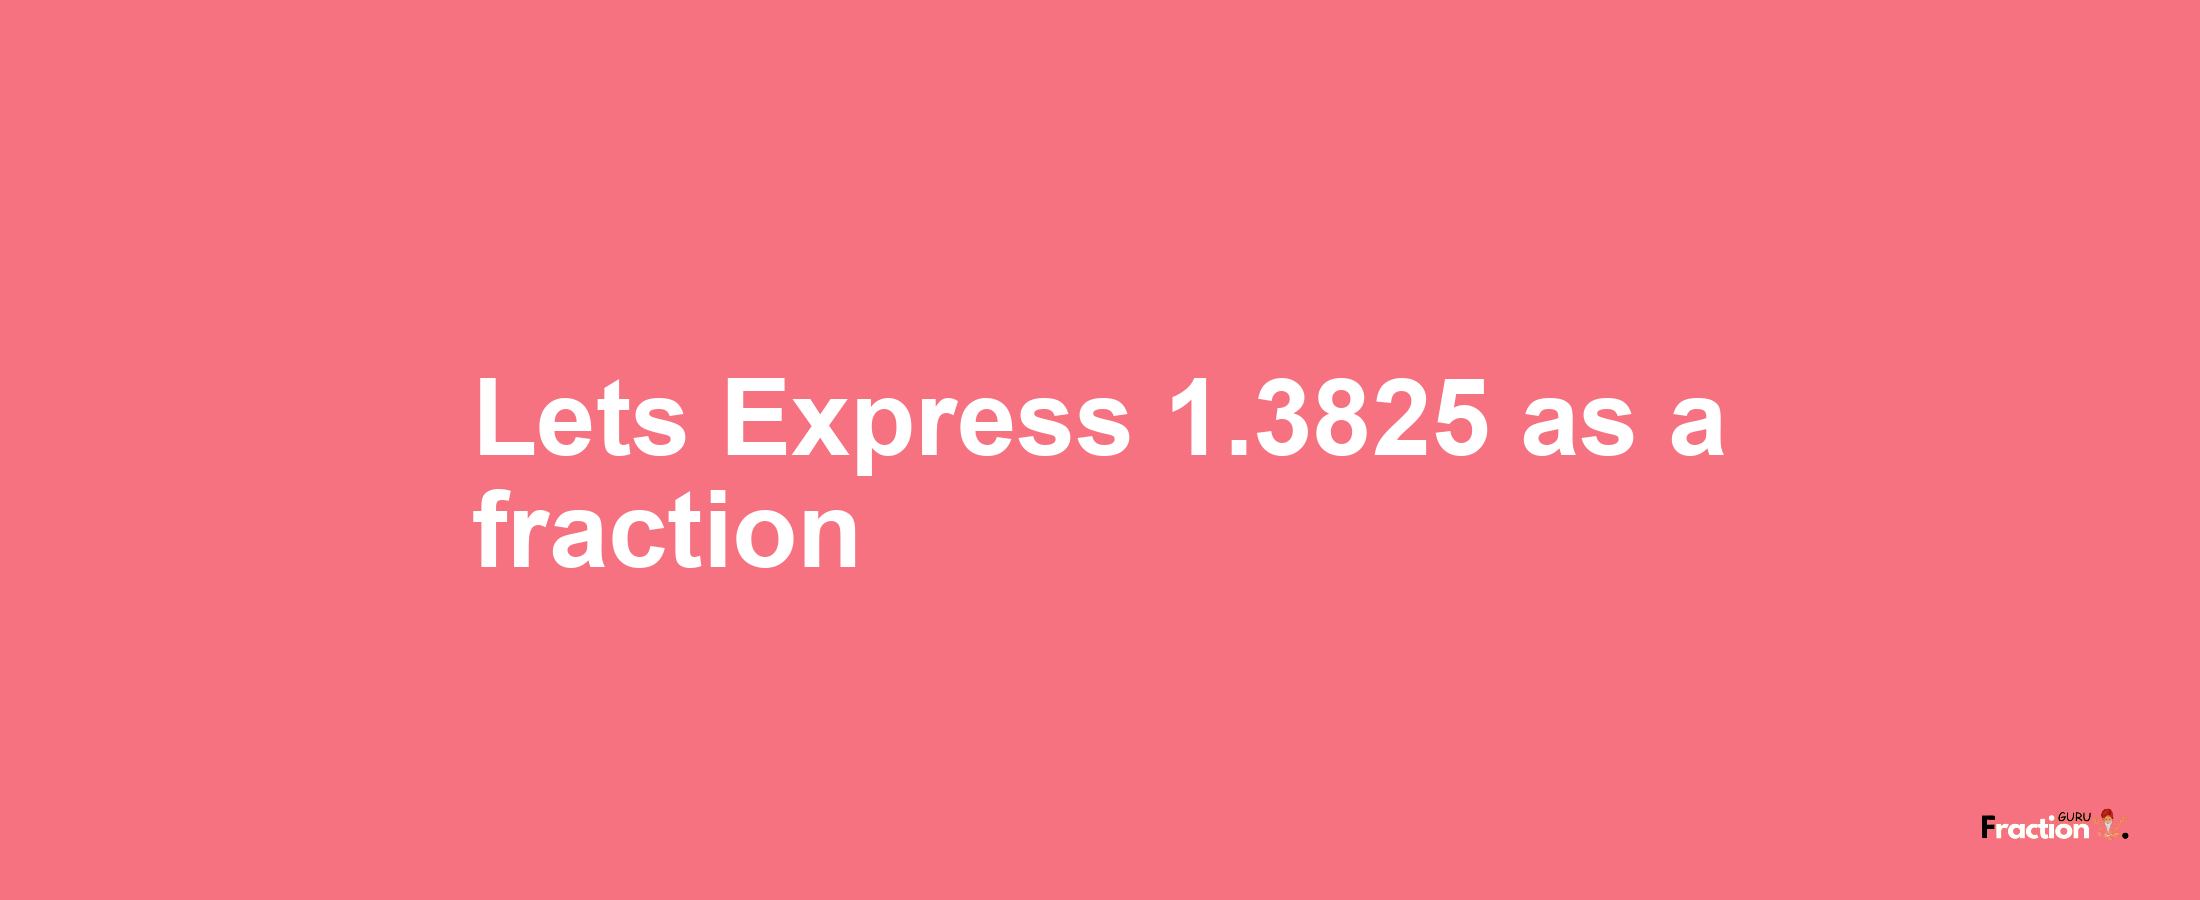 Lets Express 1.3825 as afraction